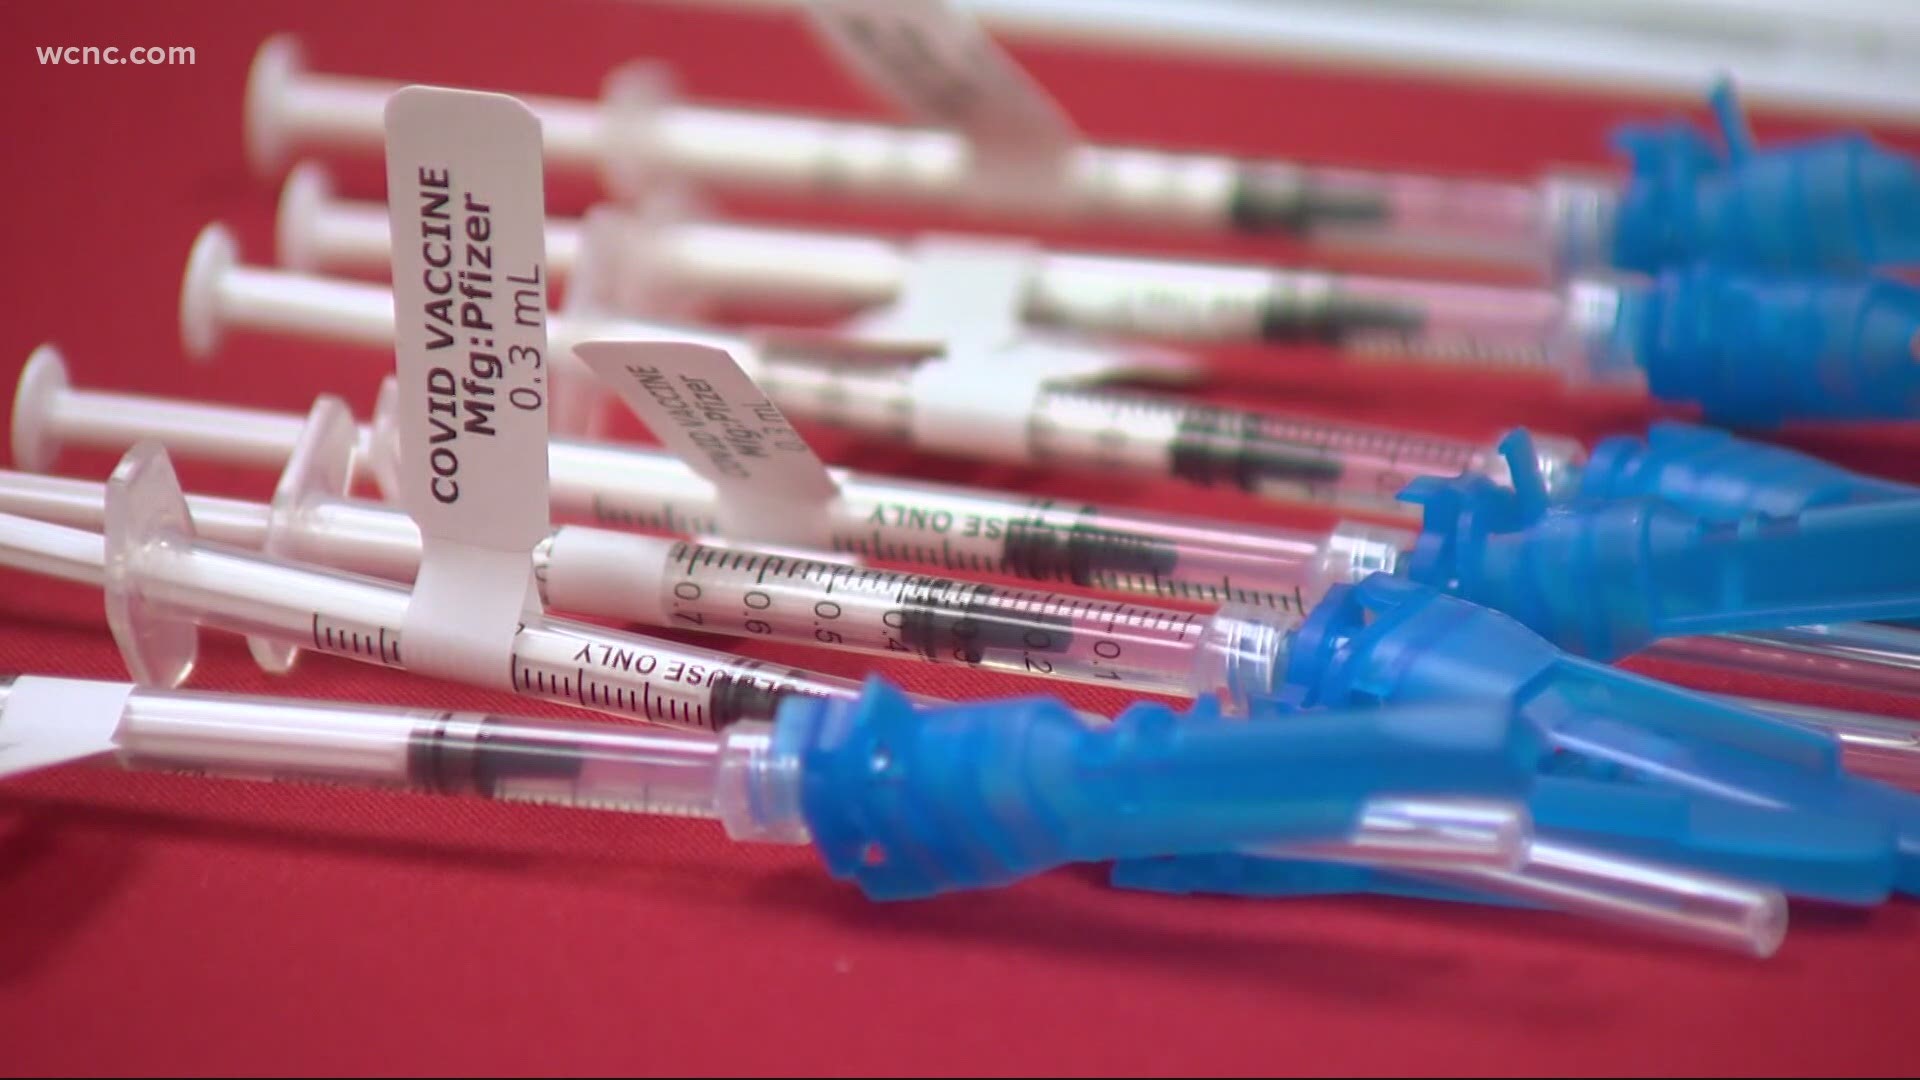 Gov. Roy Cooper is set to announce a new cash incentive for people taking the COVID-19 vaccine: A lottery system, similar to that in Ohio and other states.